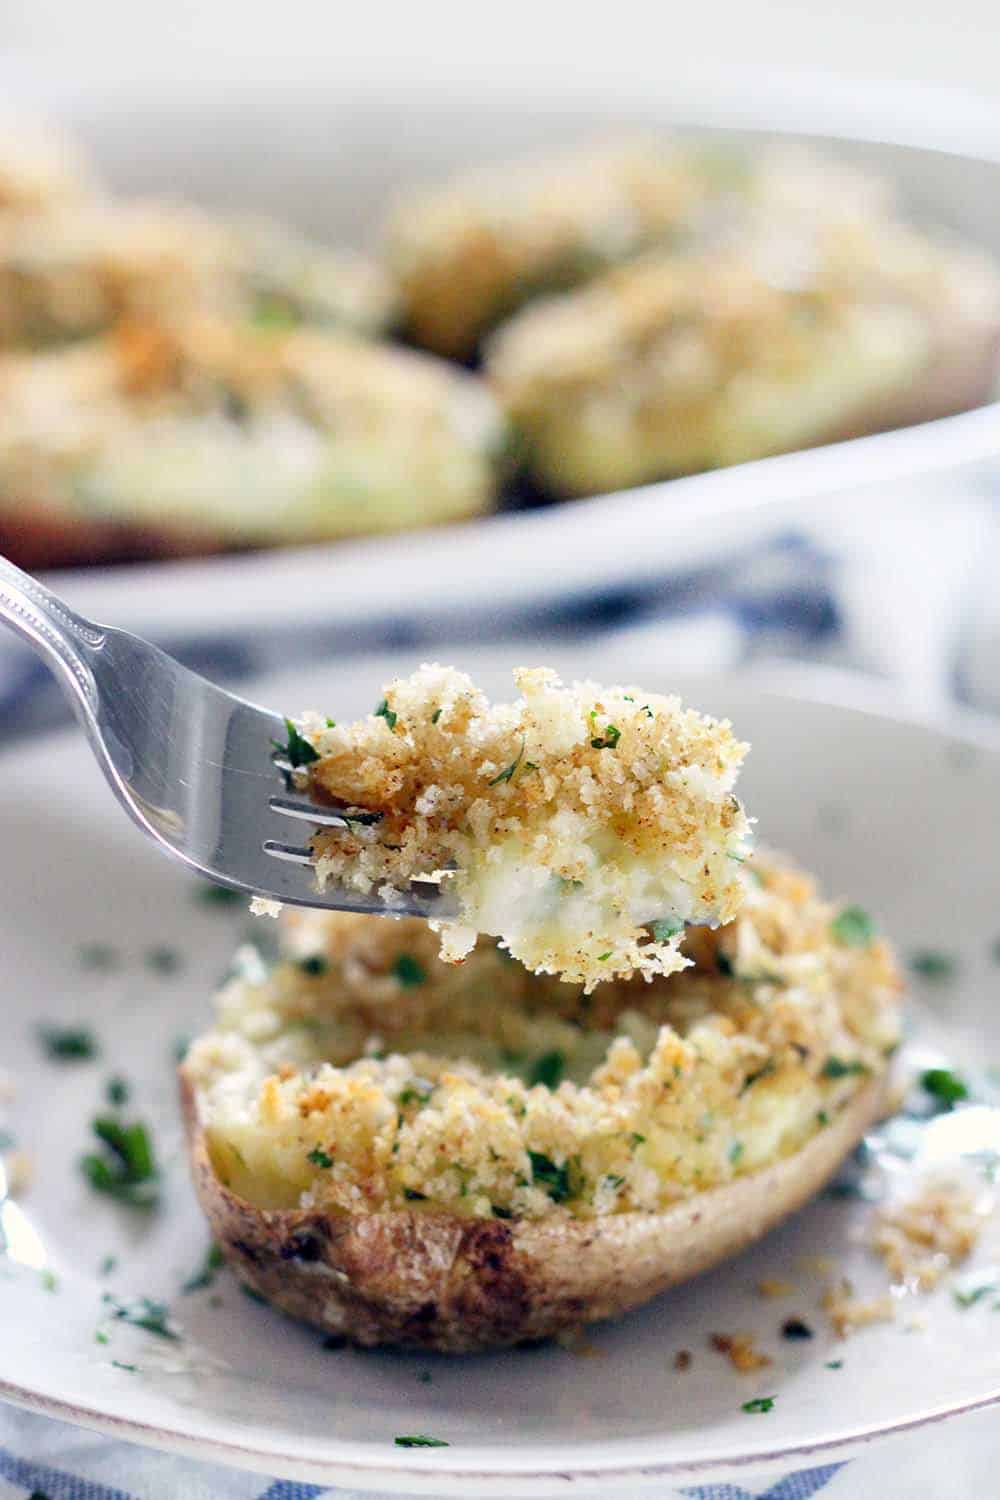 Creamy on the inside, crunchy breadcrumb topping on the outside- these are the BEST twice baked potatoes EVER! Plus, they're freezable if you assemble ahead of time or have leftovers. They're my late grandfather's famous family recipe.